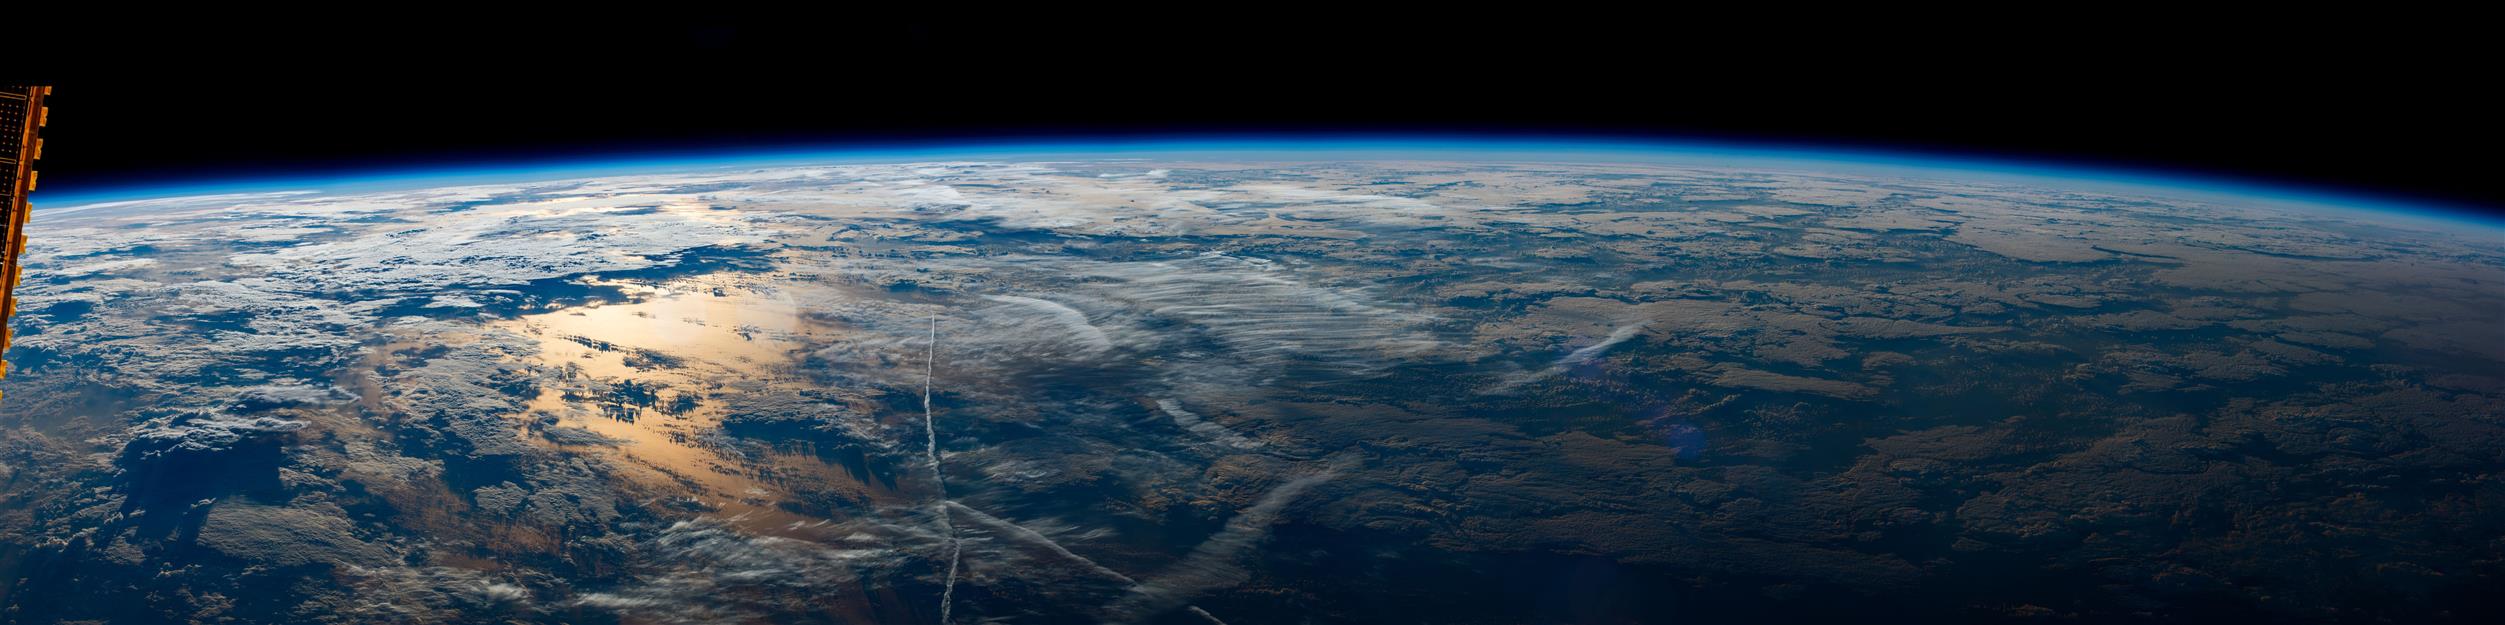 earth illustration, Planet, Space, Earth from the International Space Station, HD wallpaper